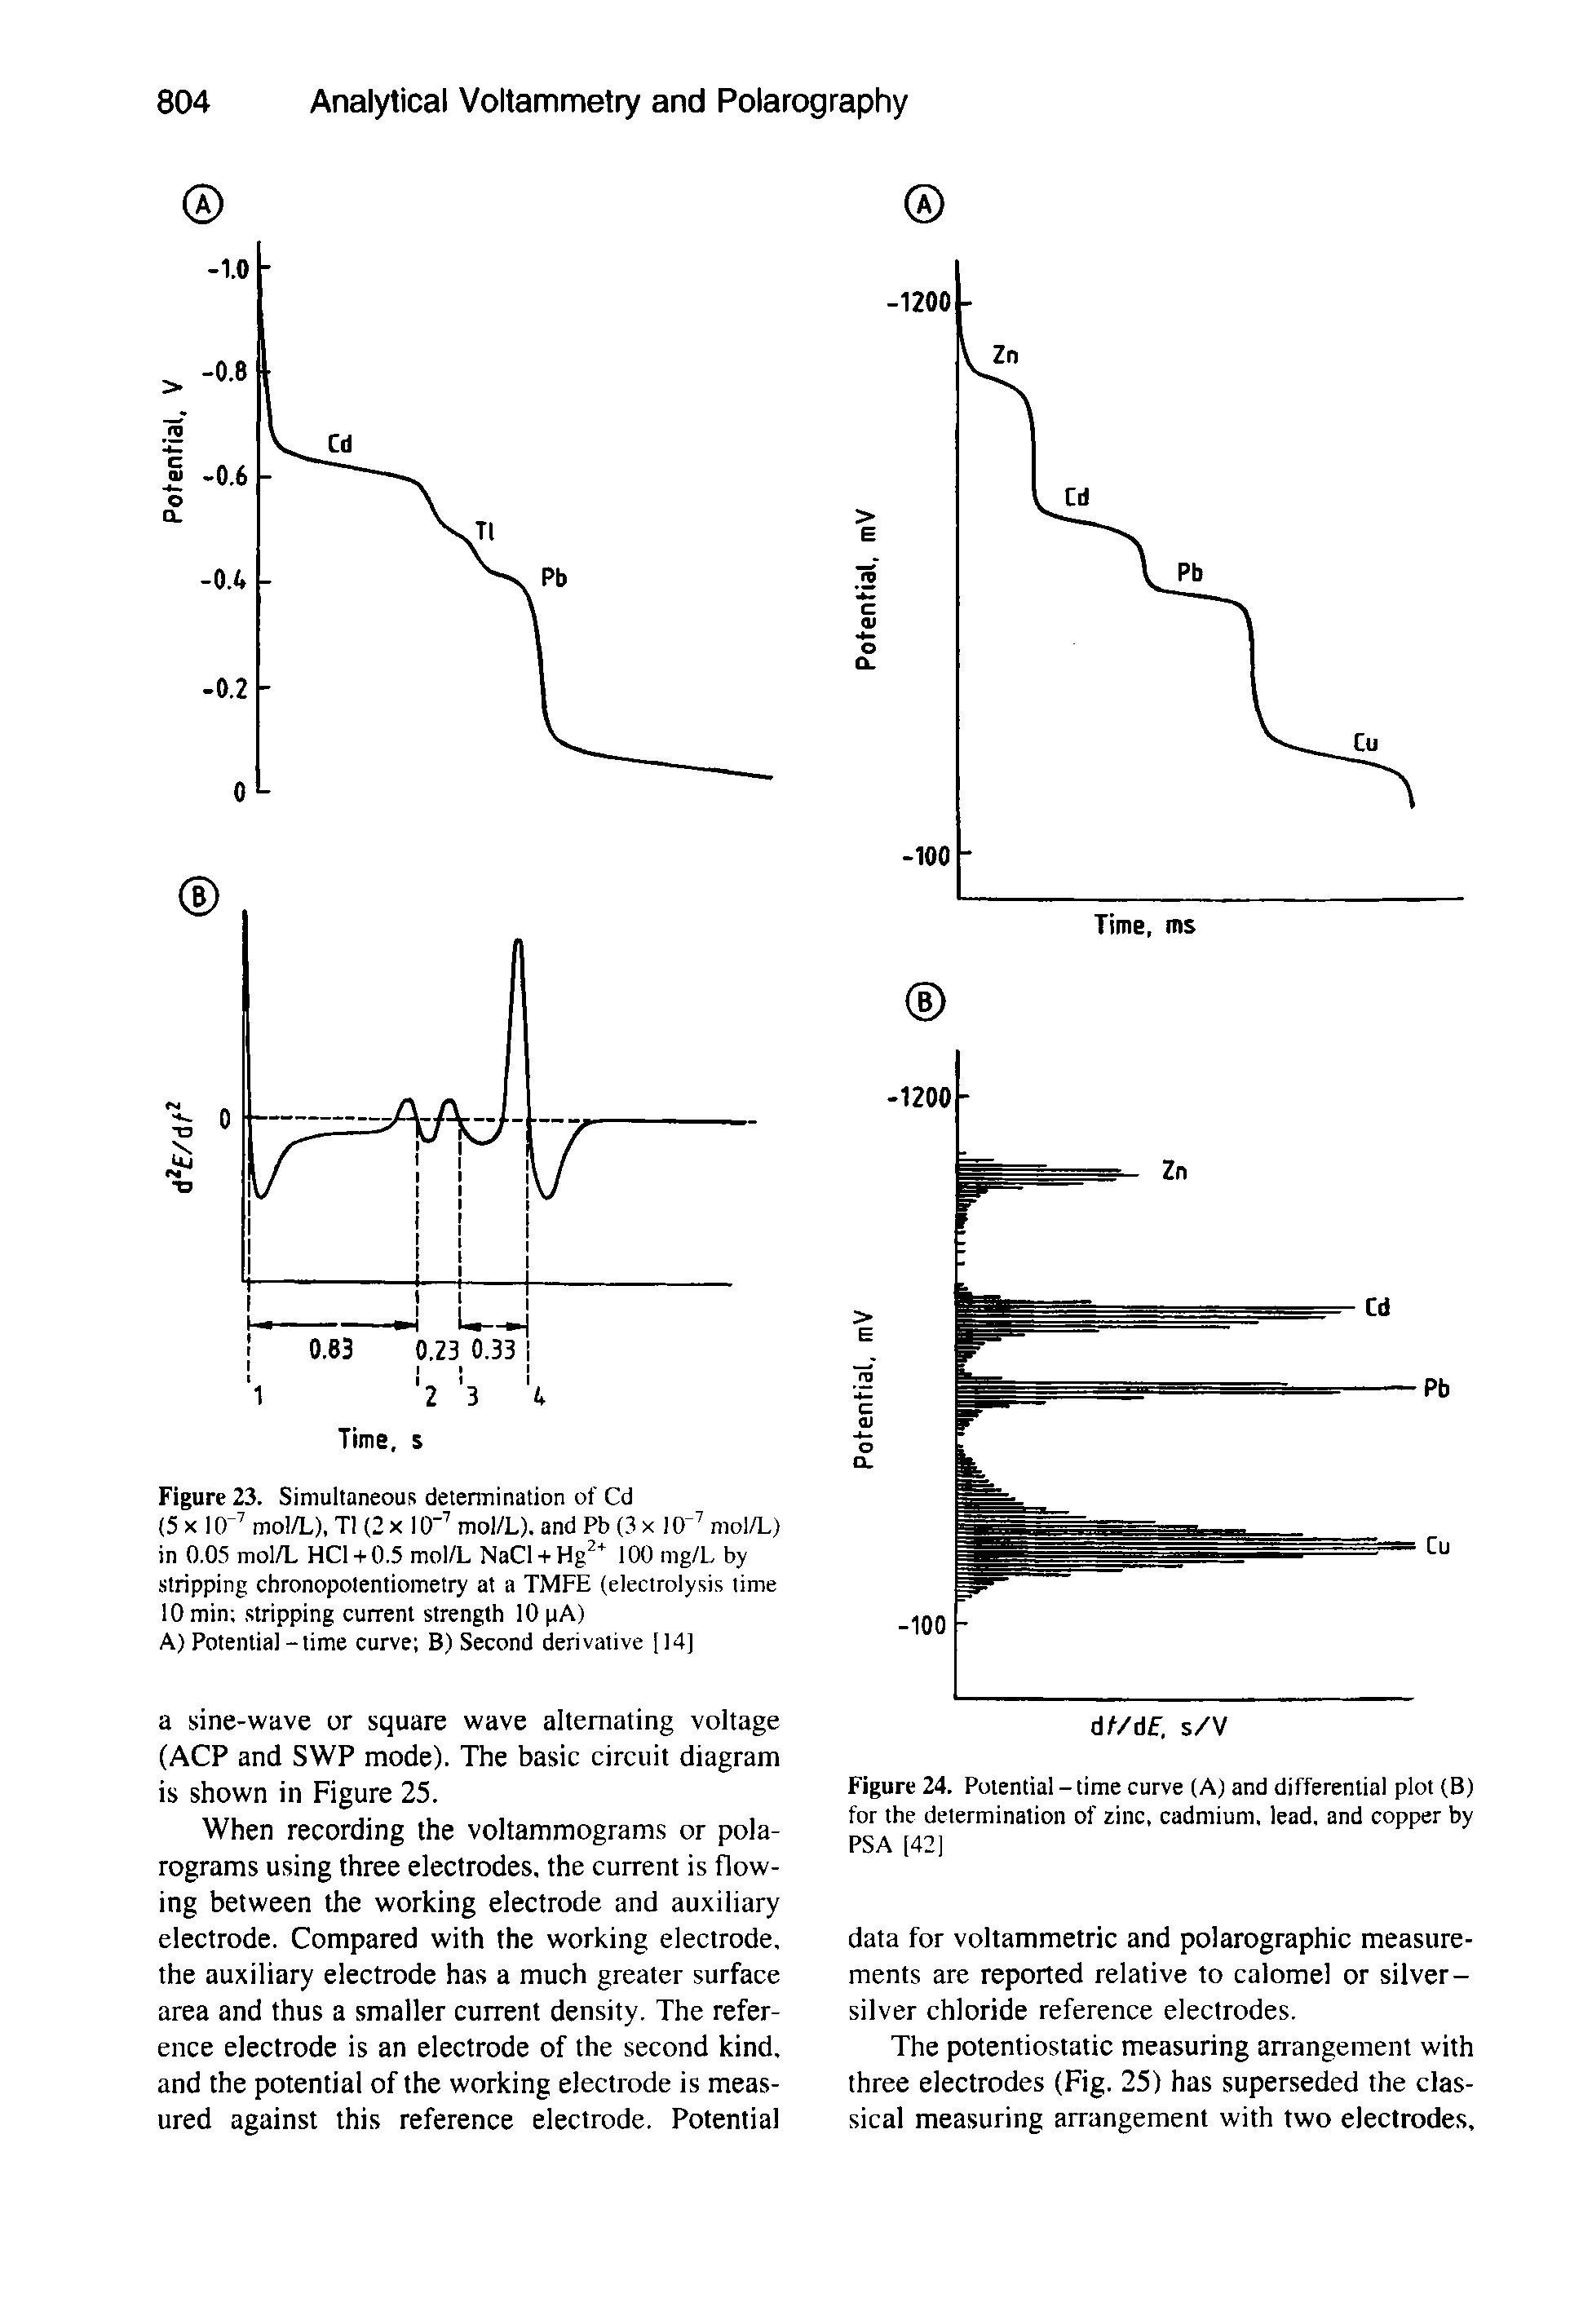 Figure 24. Potential - time curve (A) and differential plot (B) for the determination of zinc, cadmium, lead, and copper by PSA 42j...